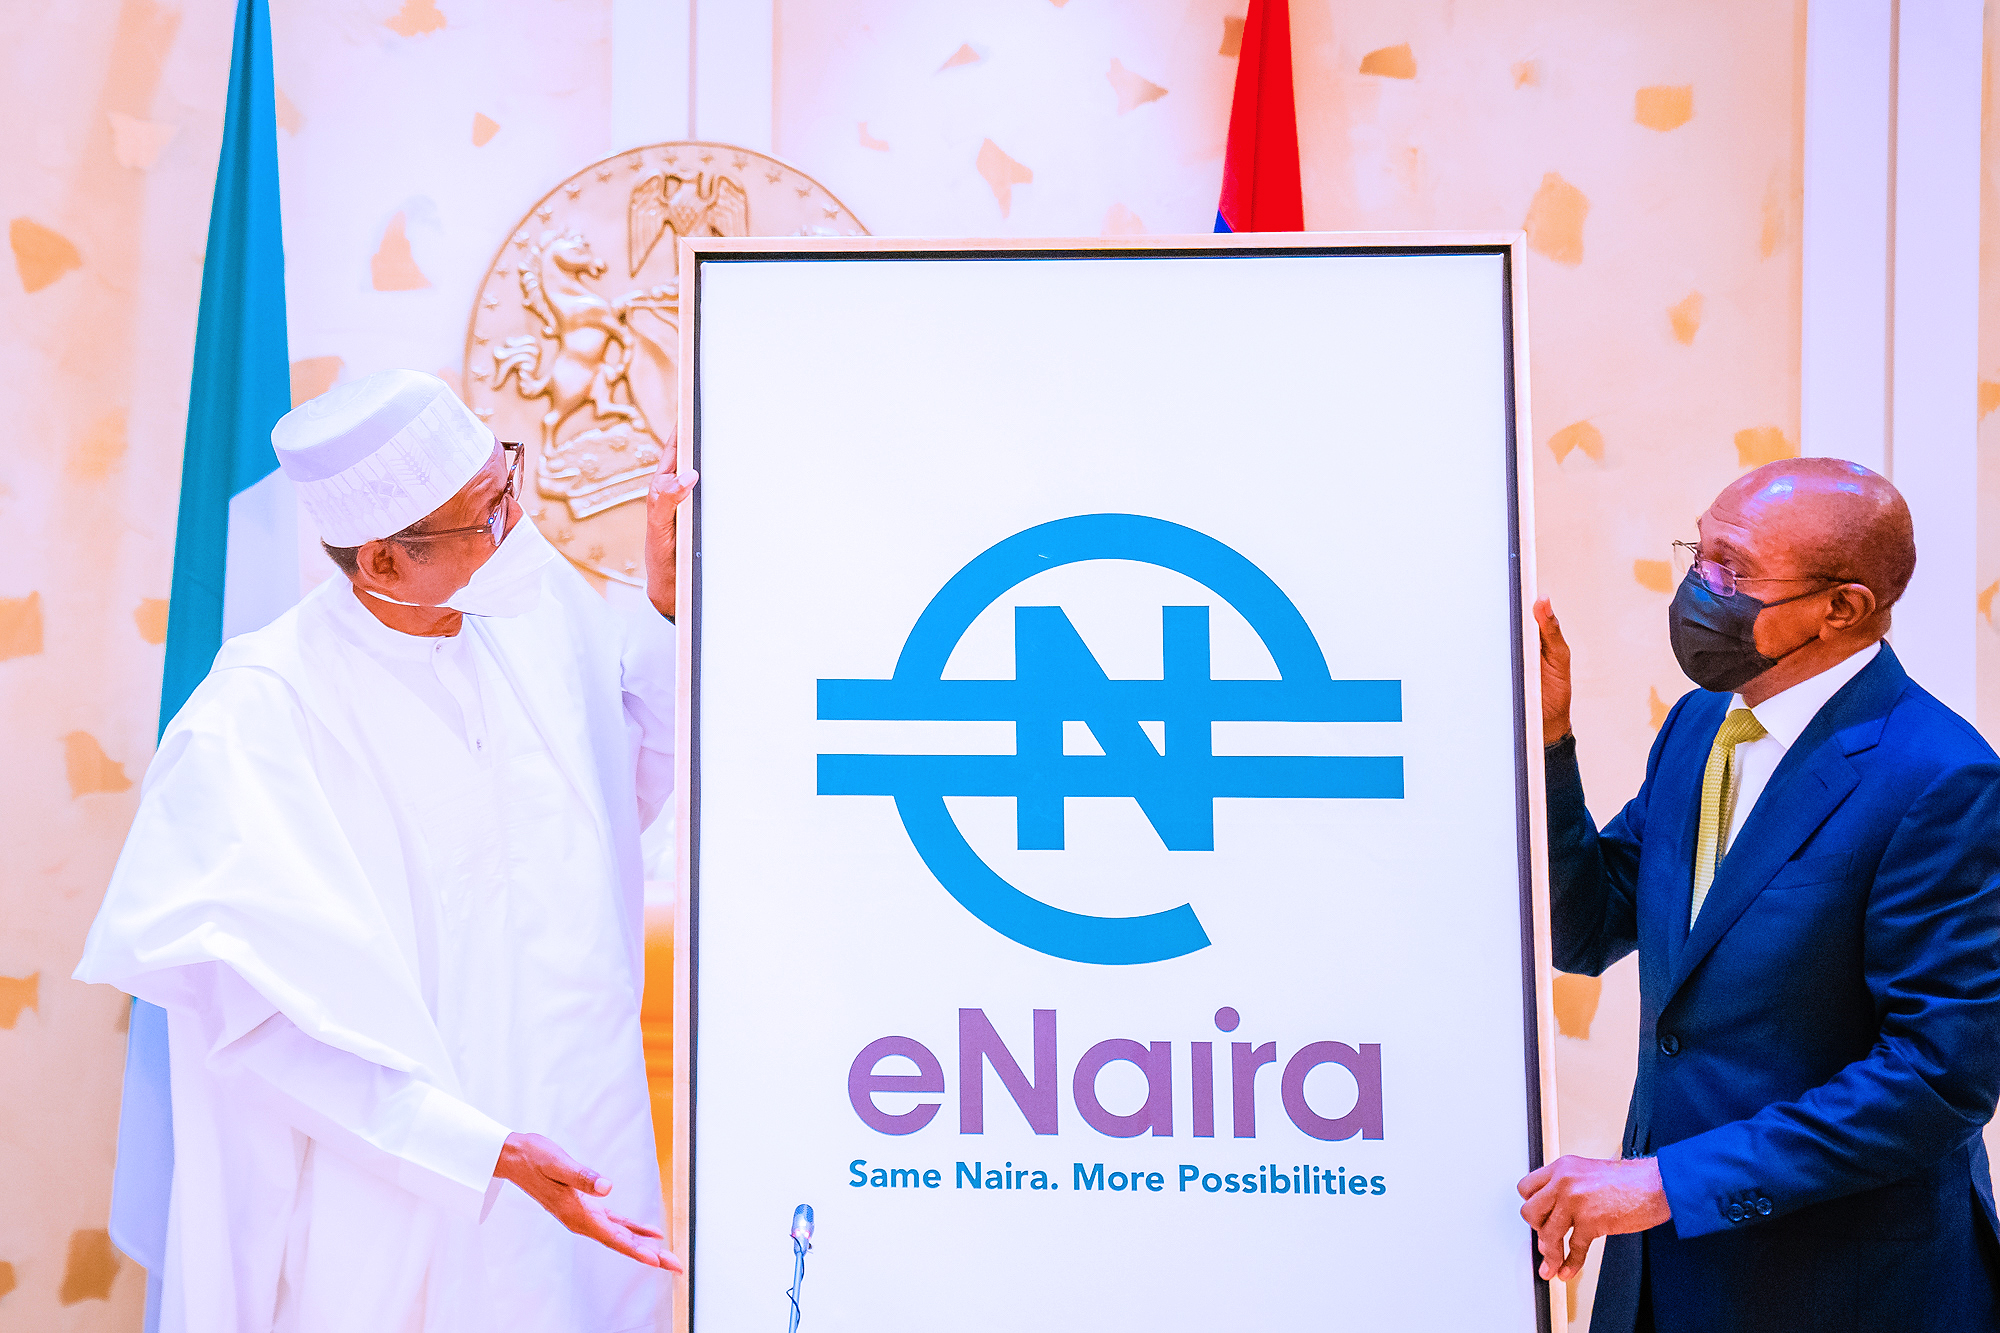 President Muhammadu Buhari (left) and CBN Governor, Godwin Emefiele, during the launch of Nigeria's digital currency, the eNaira, on Monday.